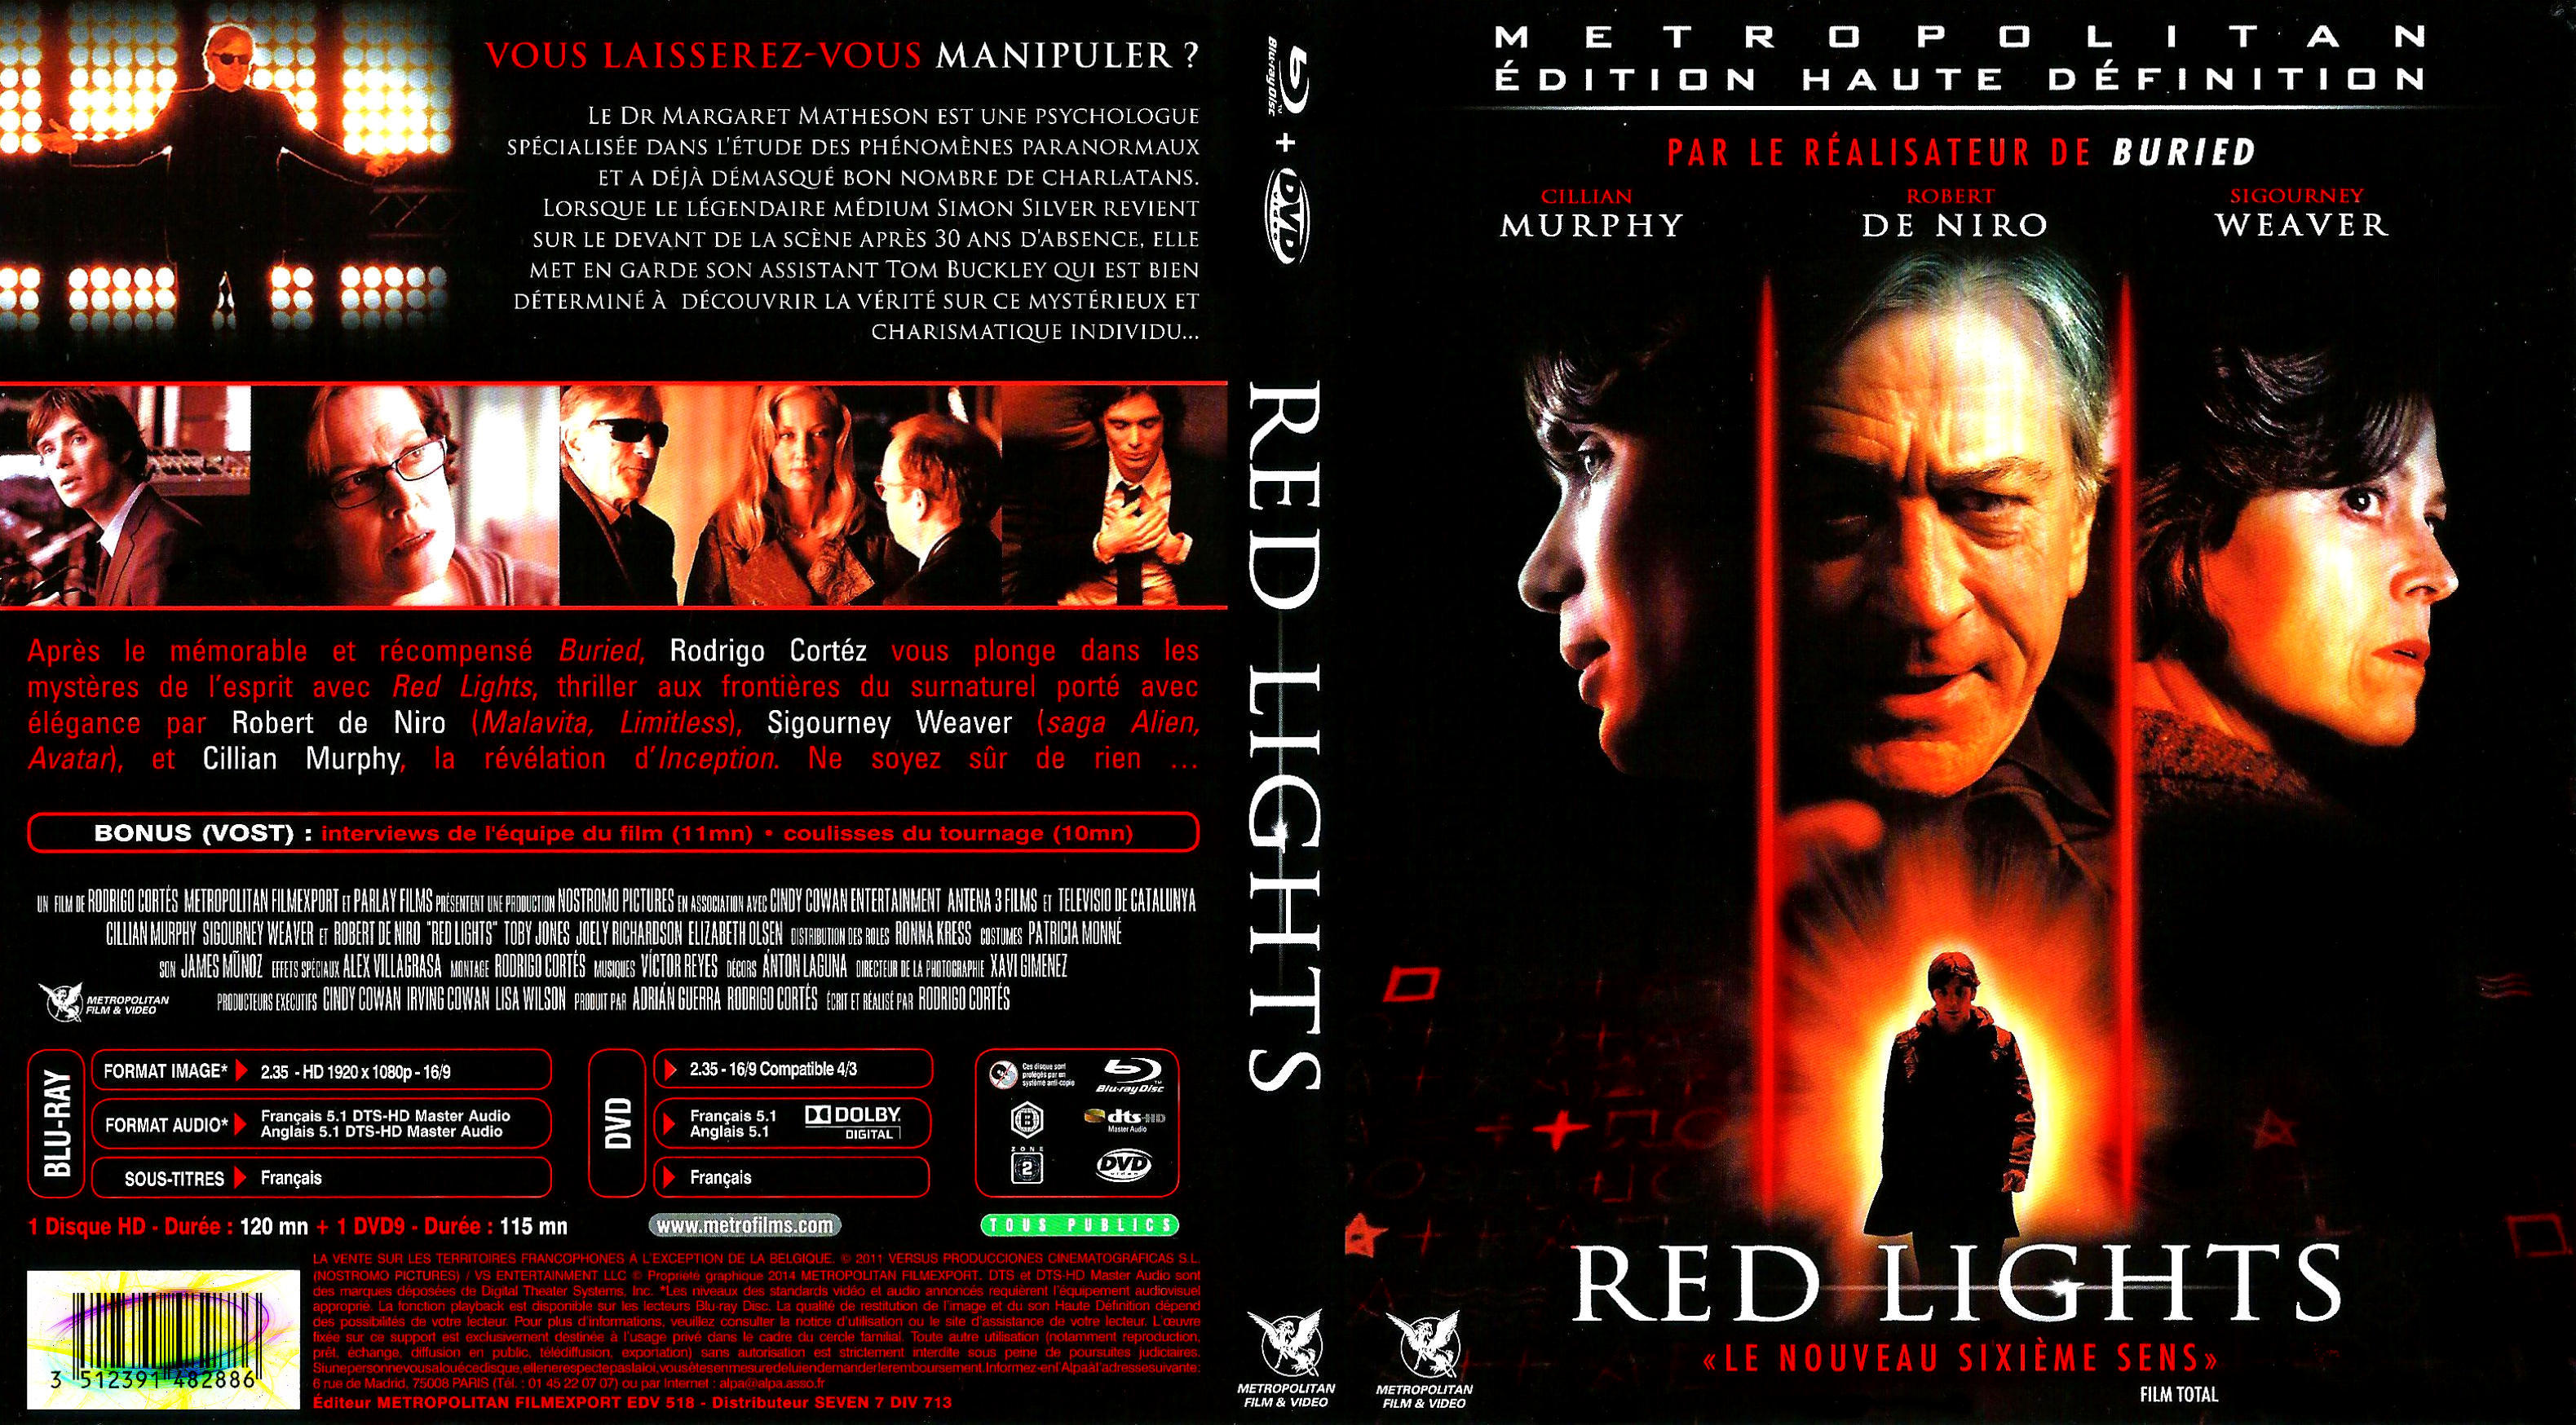 Jaquette DVD Red lights (BLU-RAY)